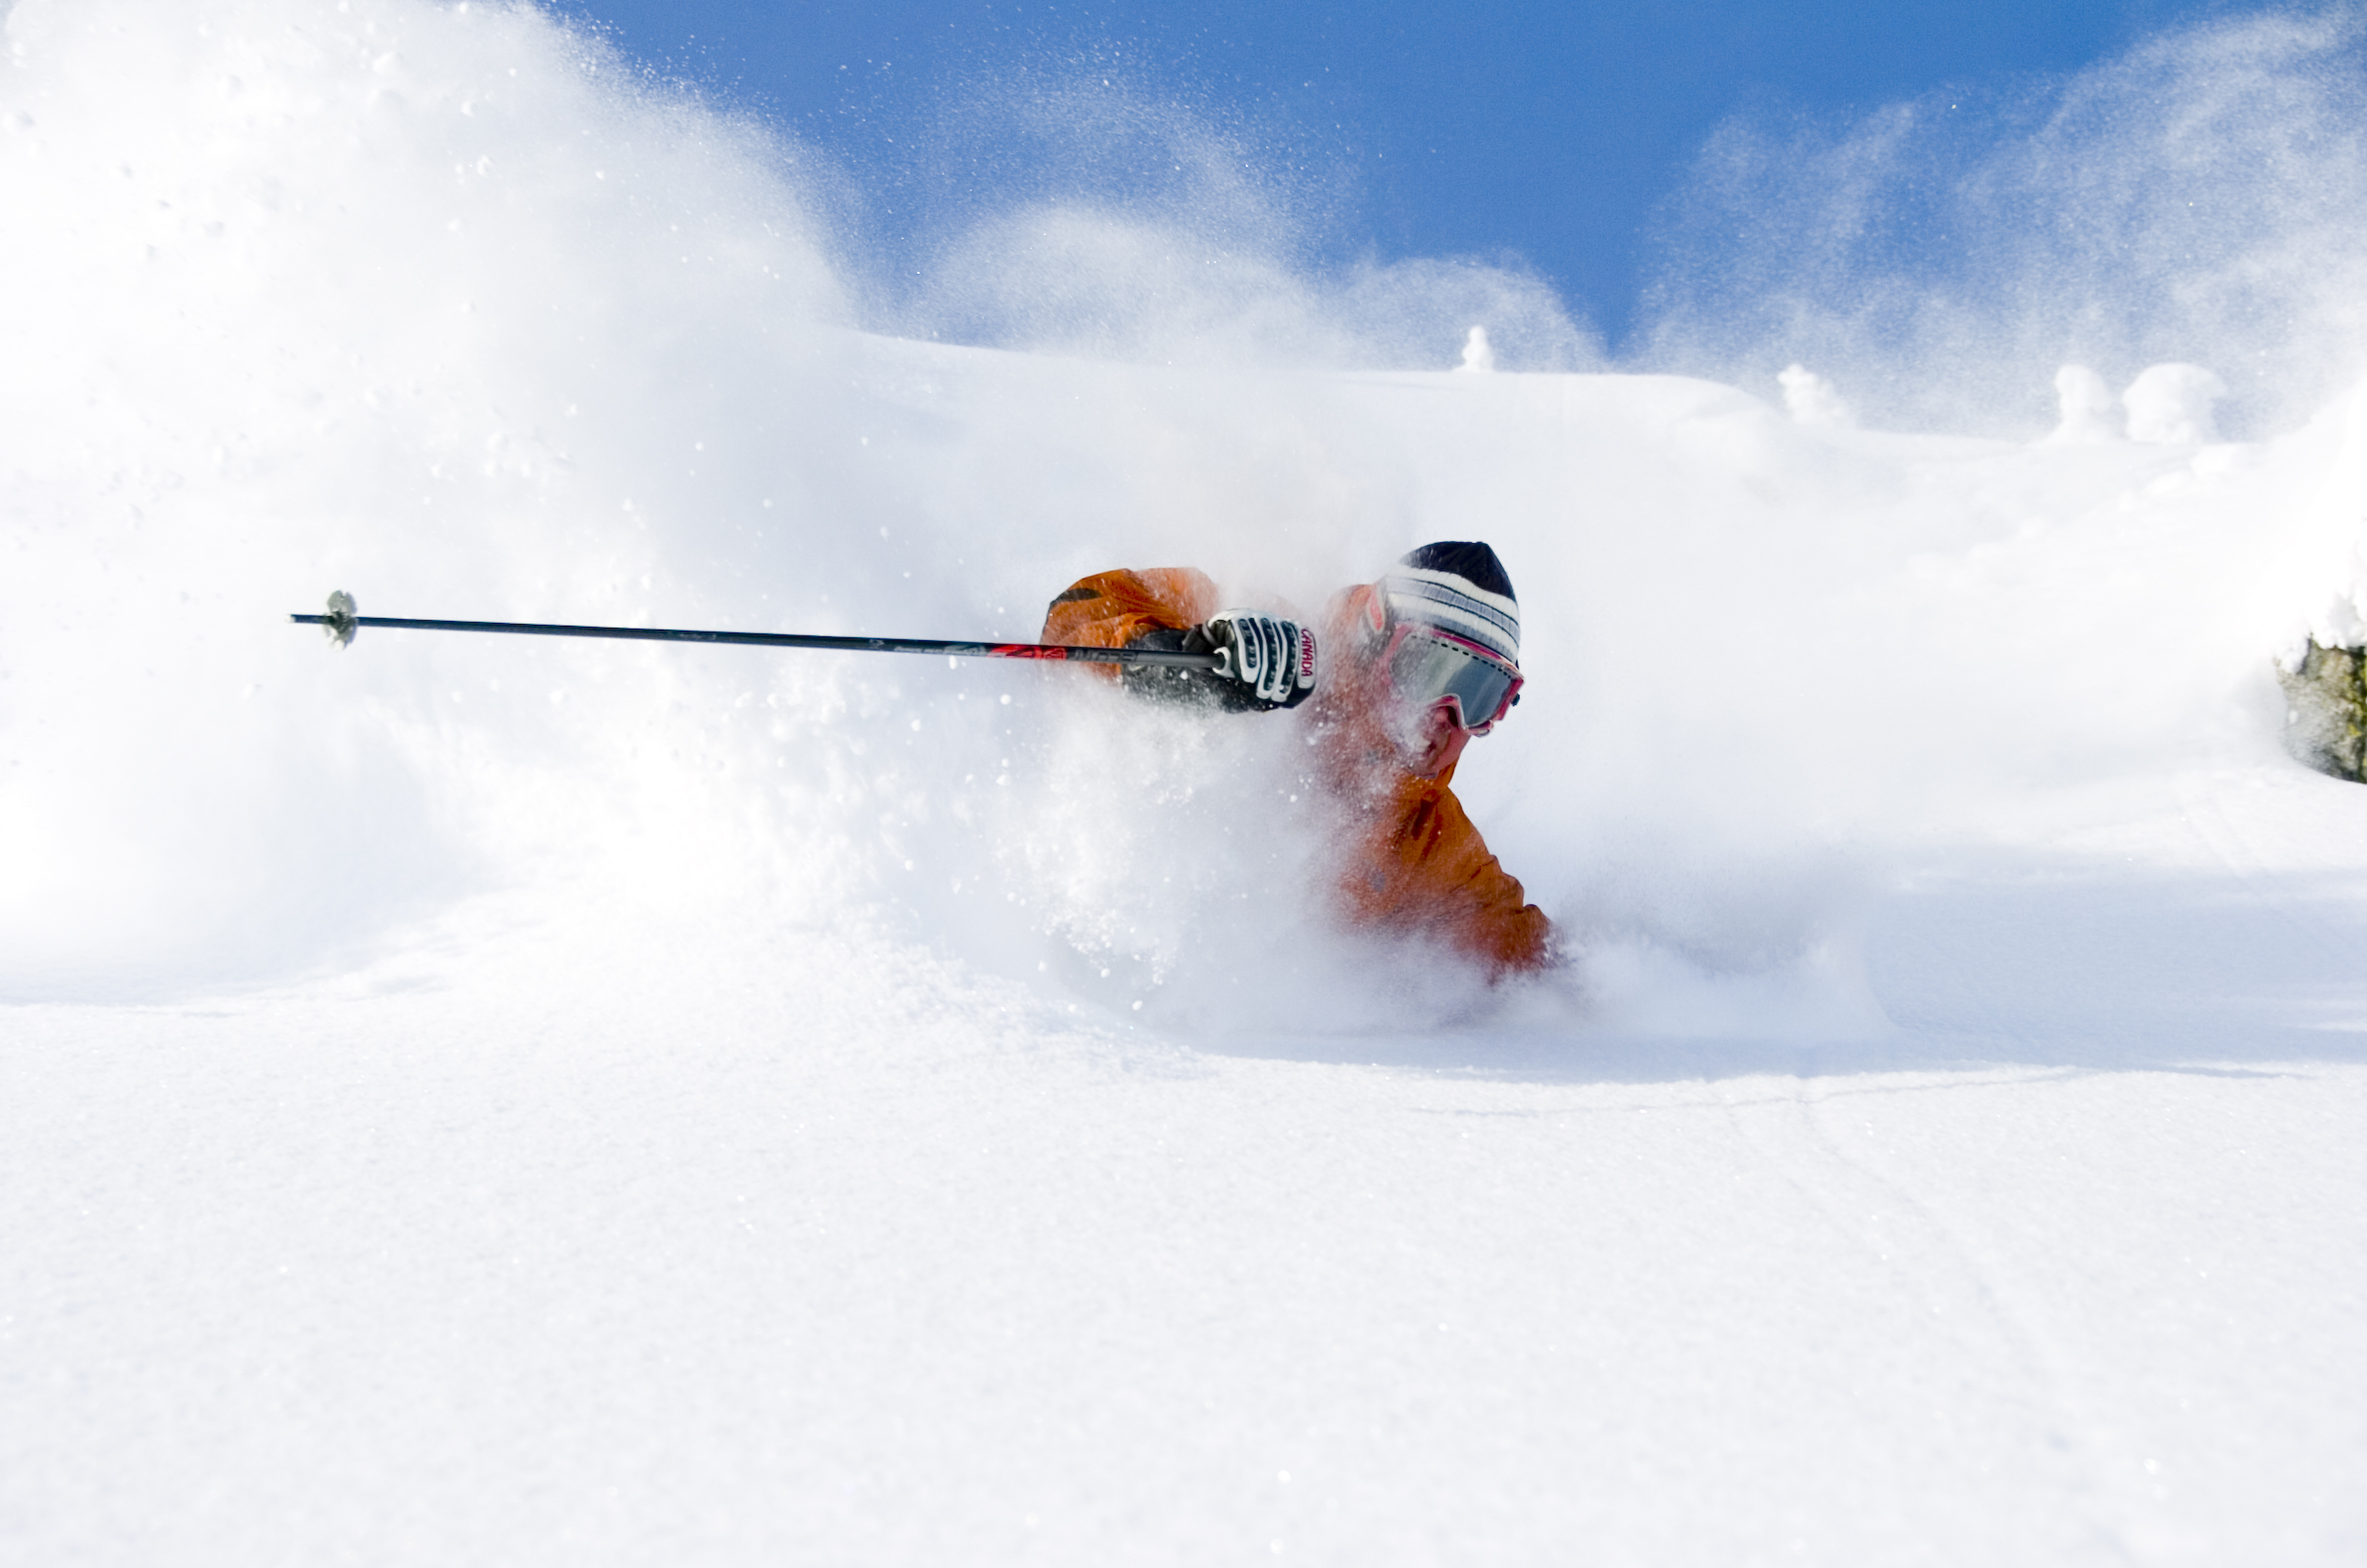 Ski And Stay For Free At Big White Ski Resort with how to ski deep powder for Dream